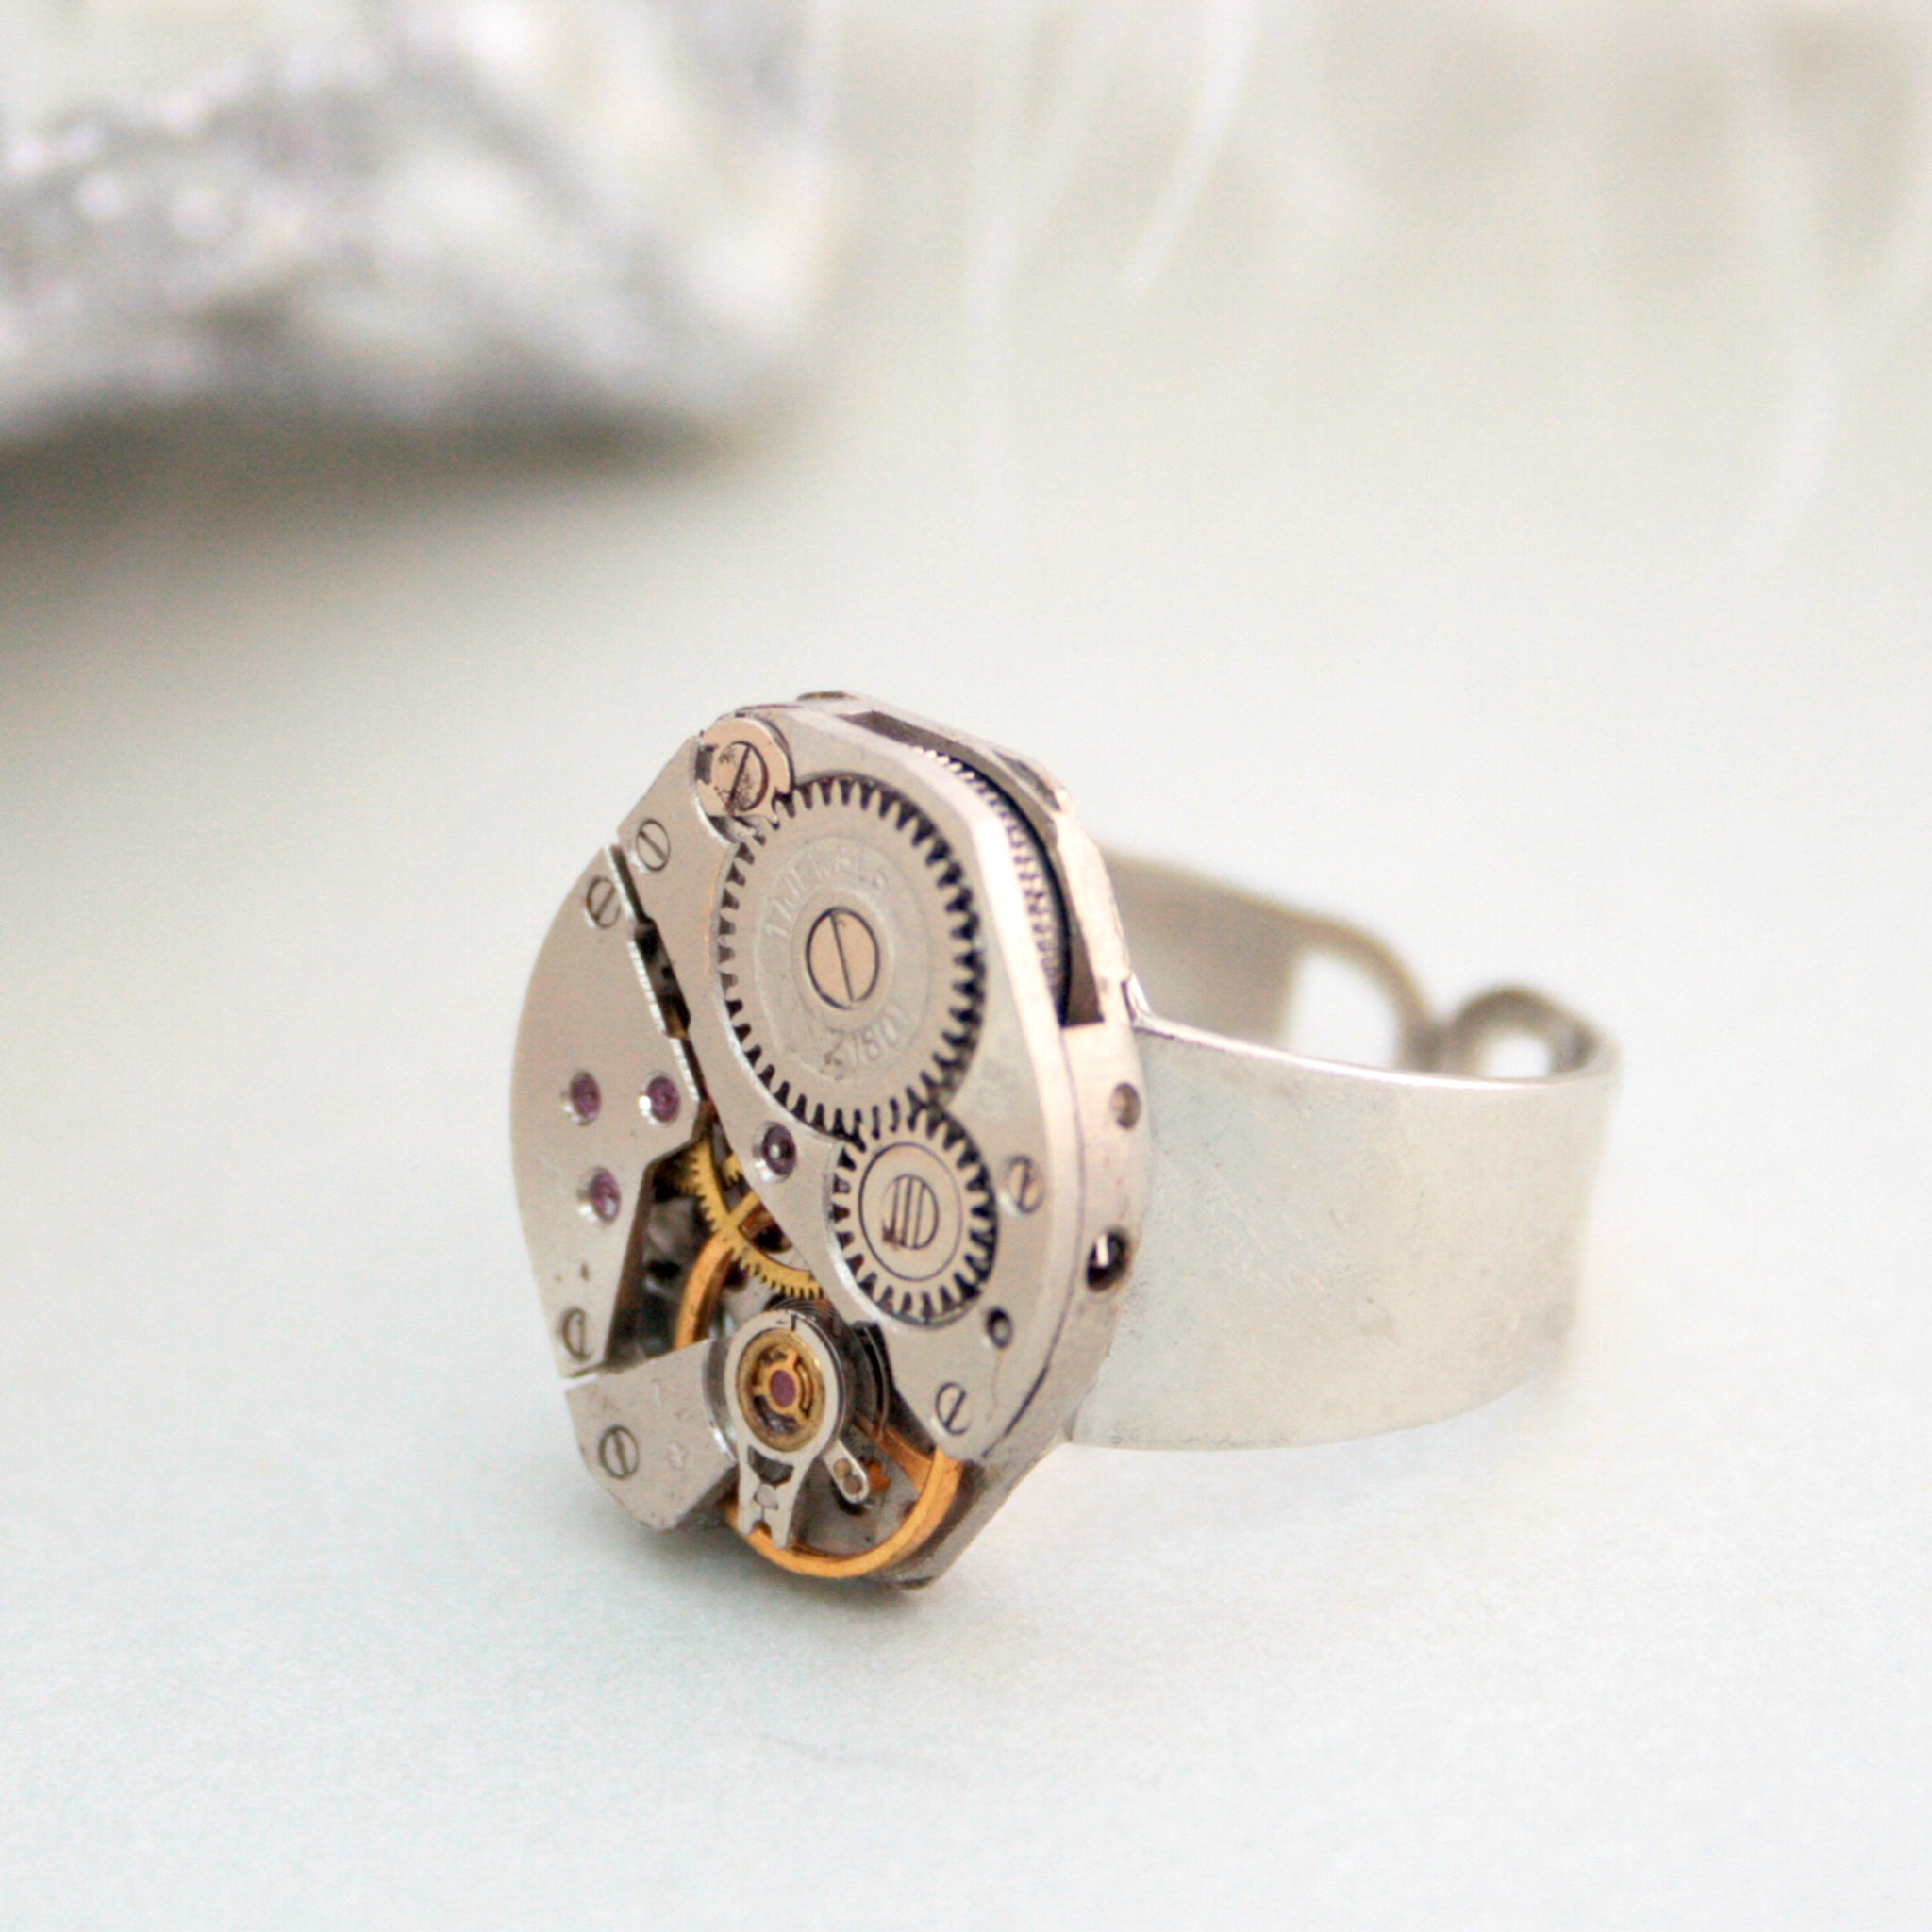 steampunk signet ring has been made using vintage Russian watch movement